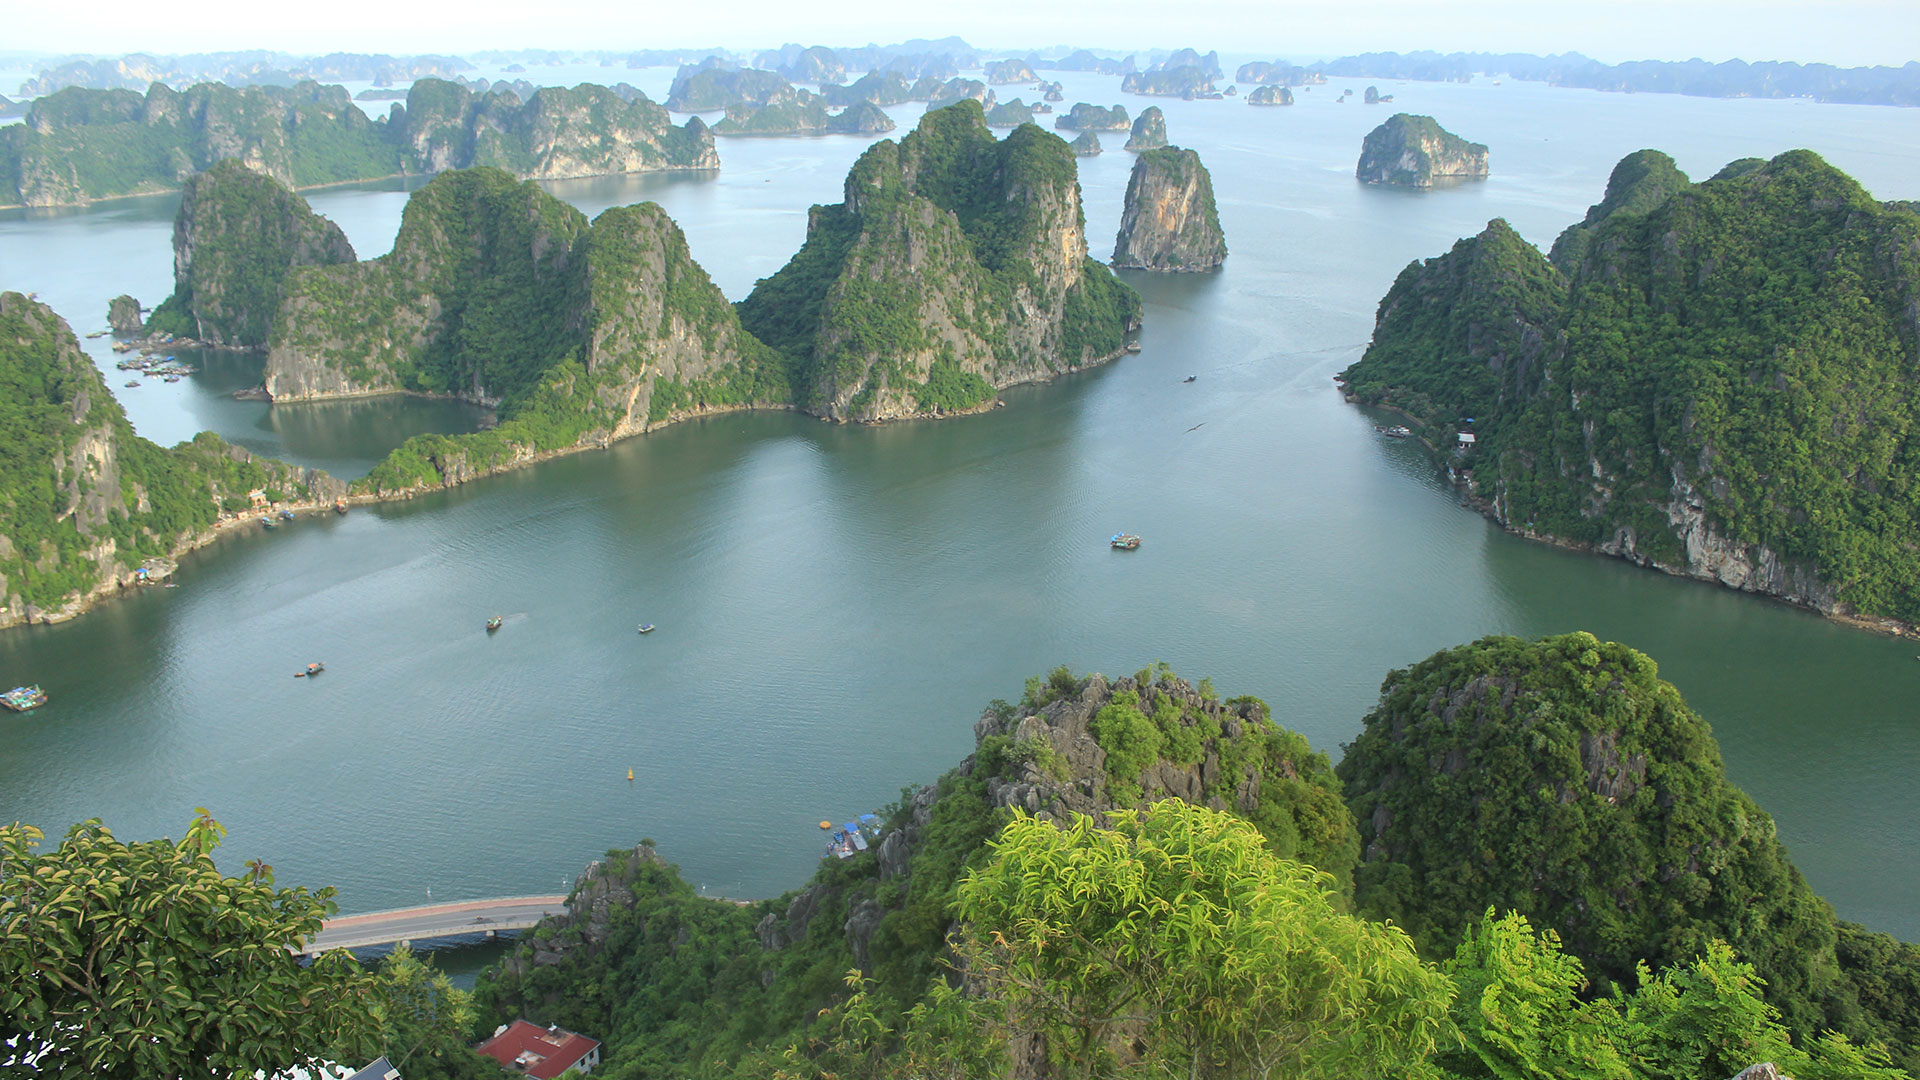 Panoramic view of Halong Bay's karst landscape and blue waters